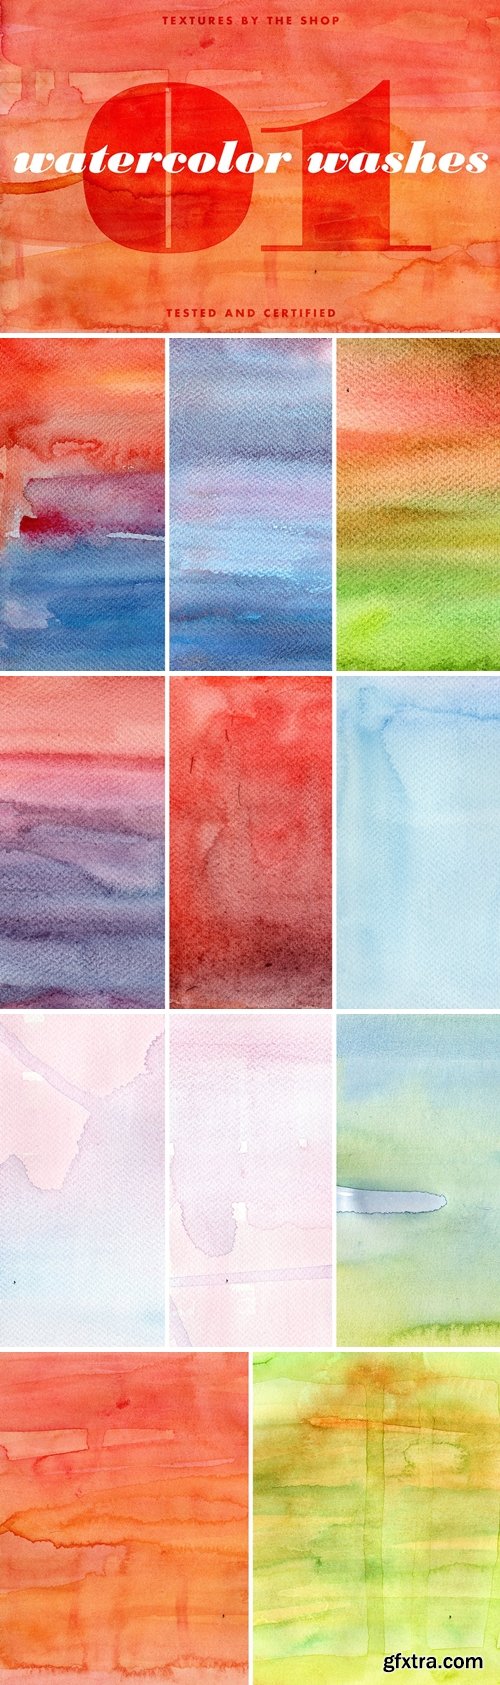 CM - Watercolor washes textures volume 01 227522